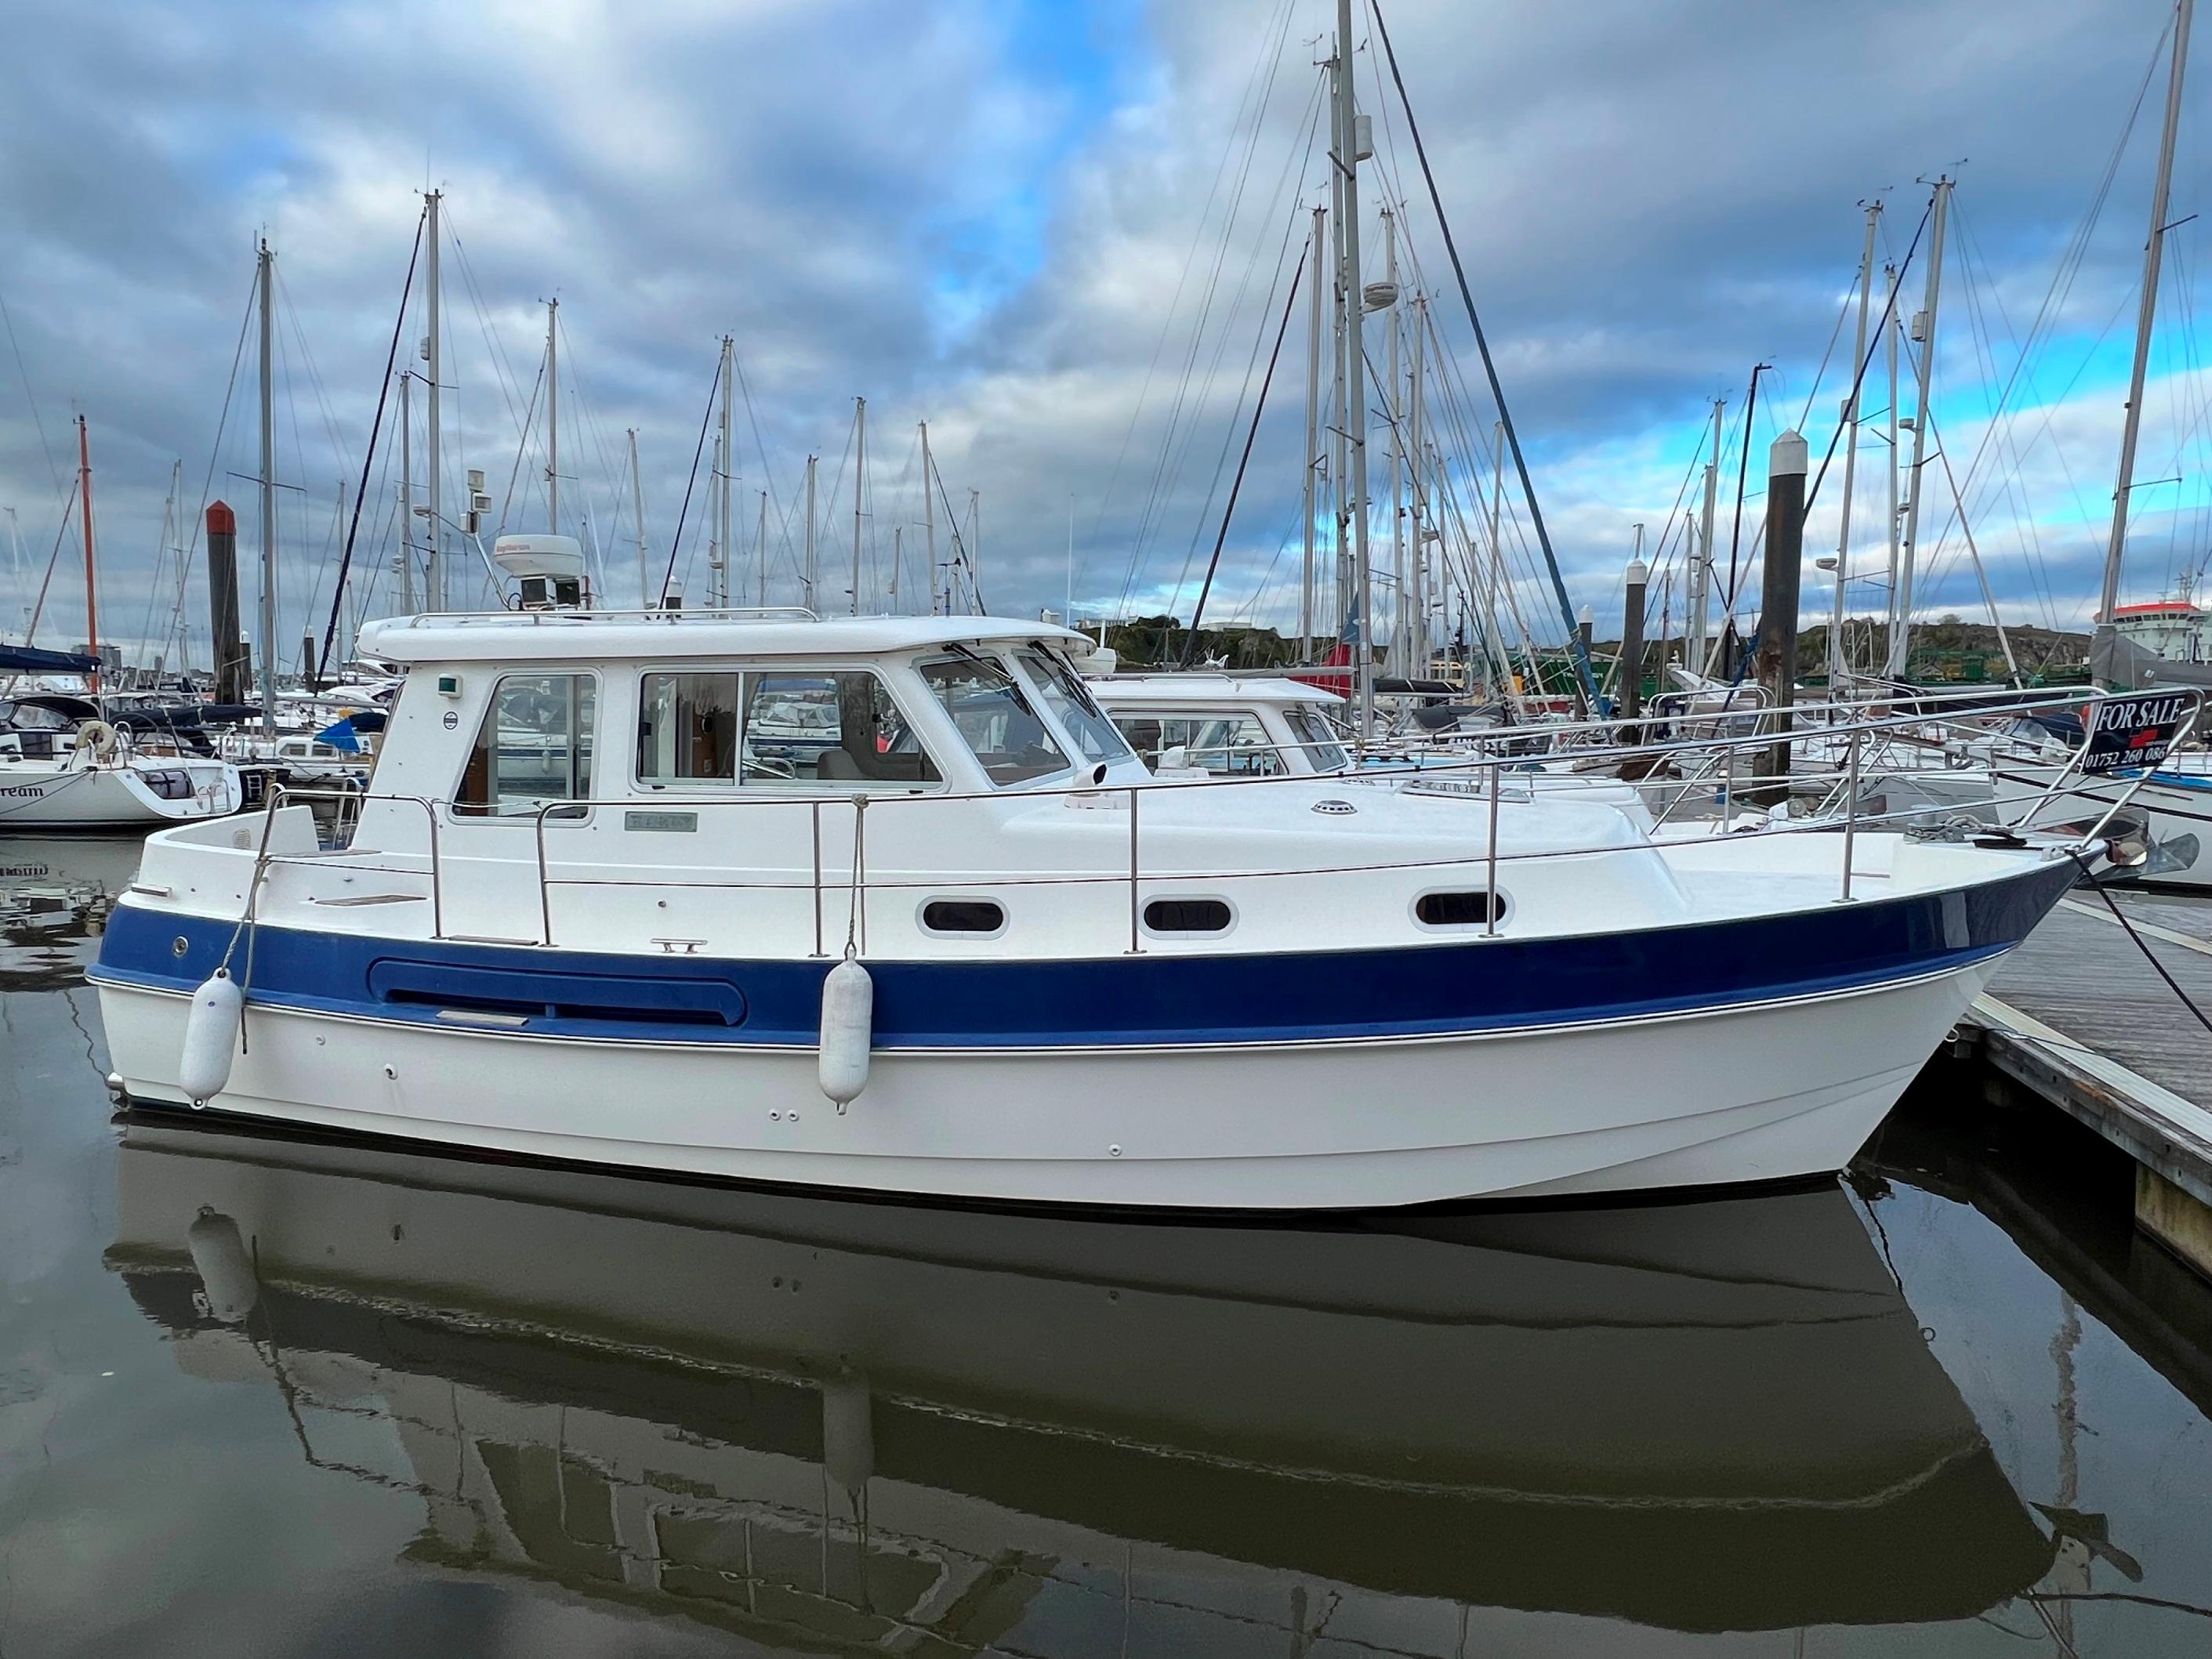 Trader 54 Sunliner, 16m, 2001 - Isle of Wight